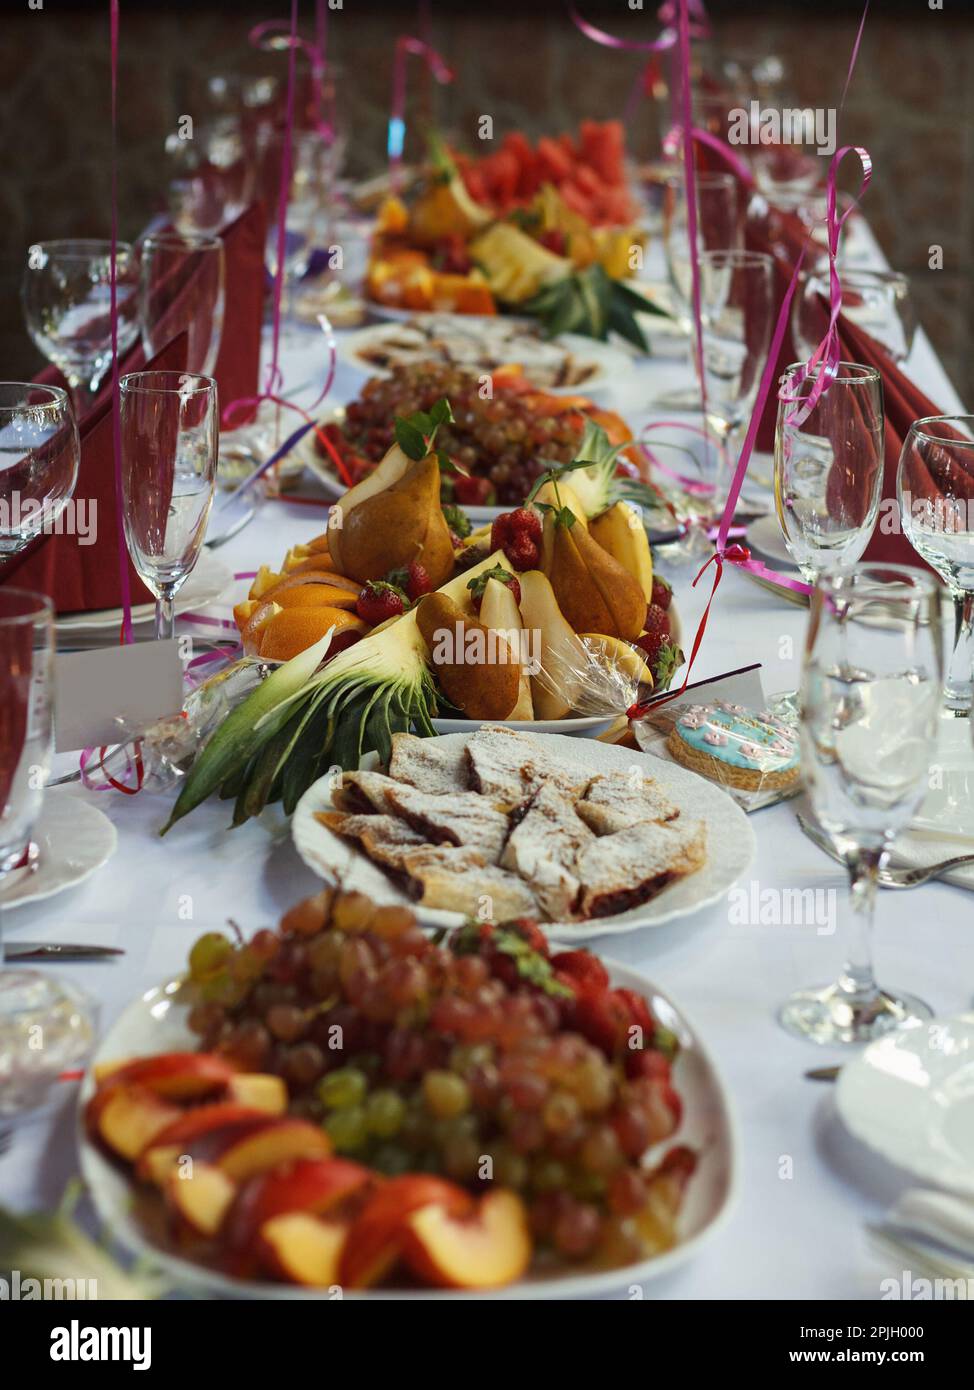 Festive banquet table with dessert food in restaurant Stock Photo